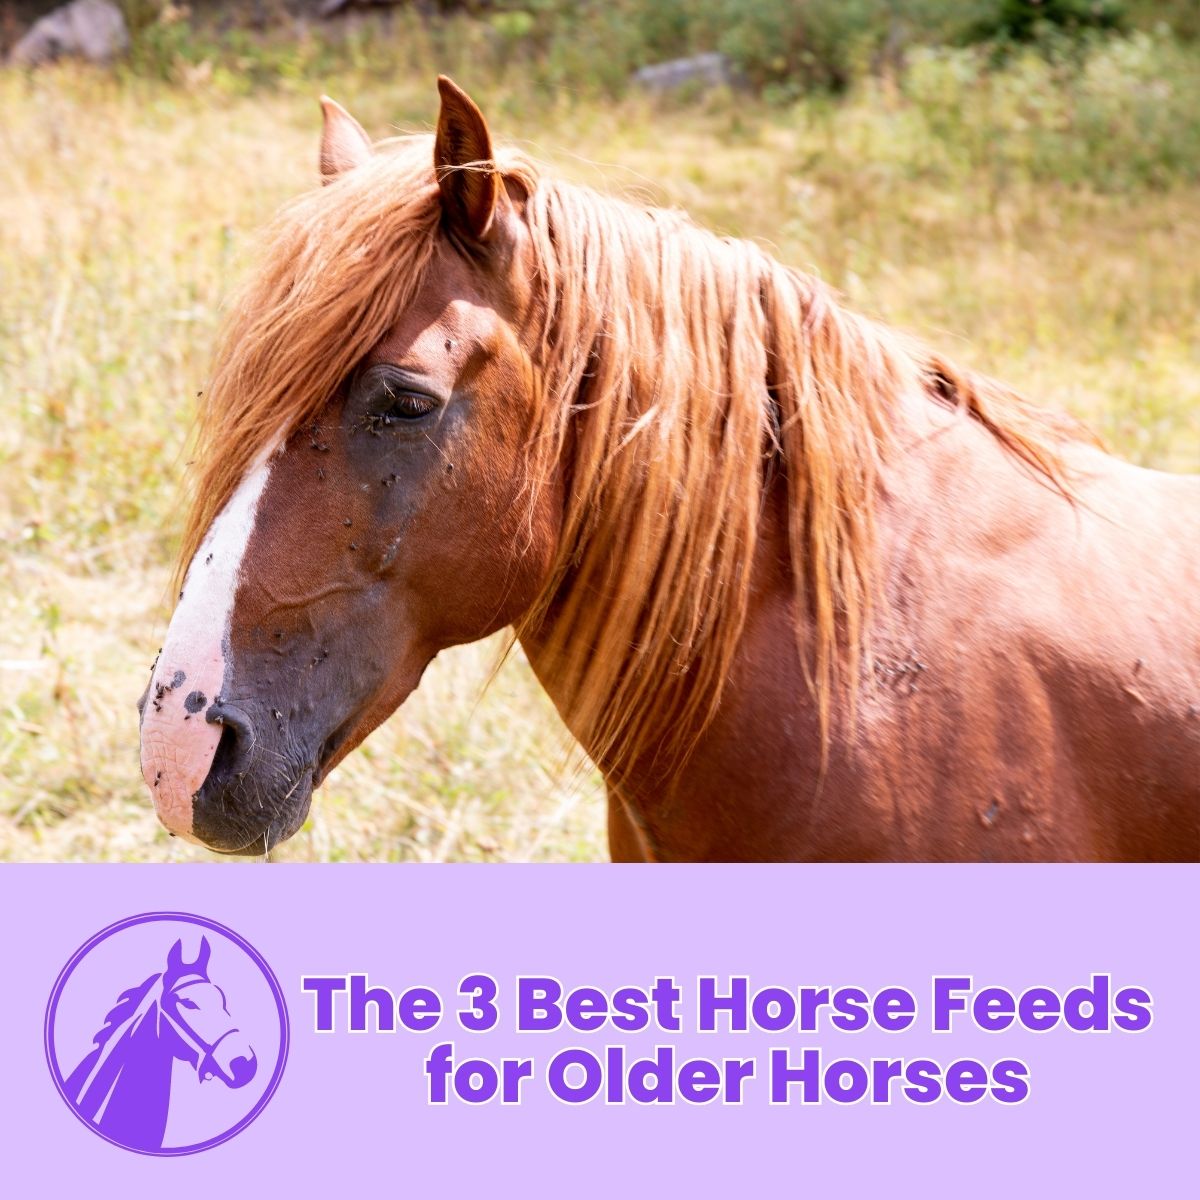 You are currently viewing The 3 Best Horse Feeds for Older Horses